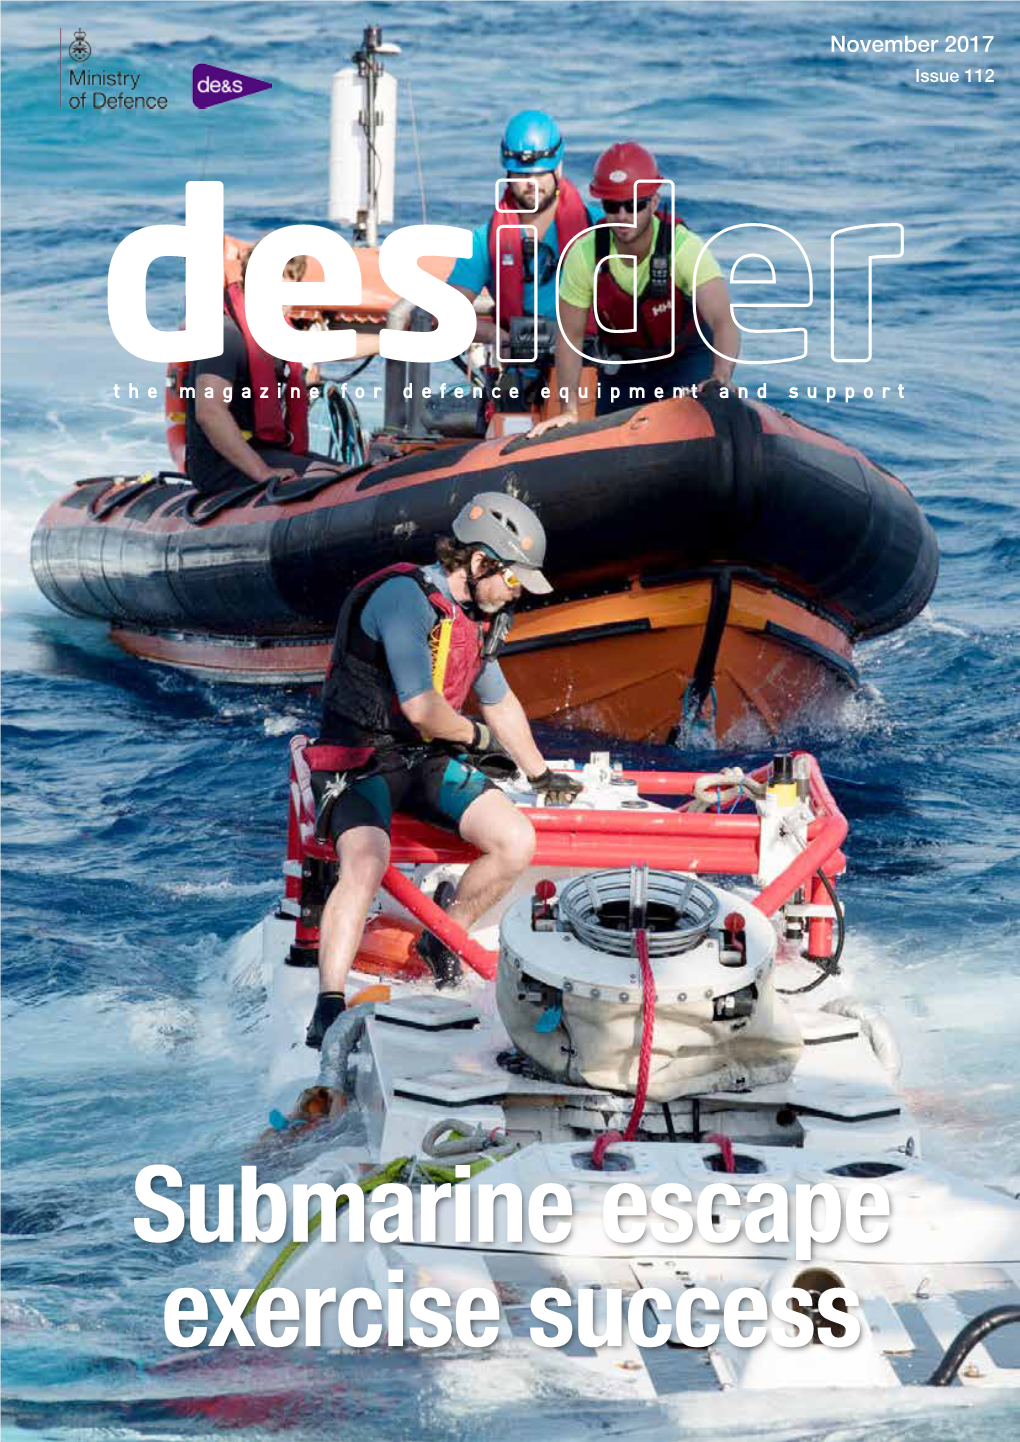 Submarine Escape Exercise Success the DE&S WAY the BLUEPRINT of the ORGANISATION NOW AVAILABLE by DOWNLOADING the DESIDER APP